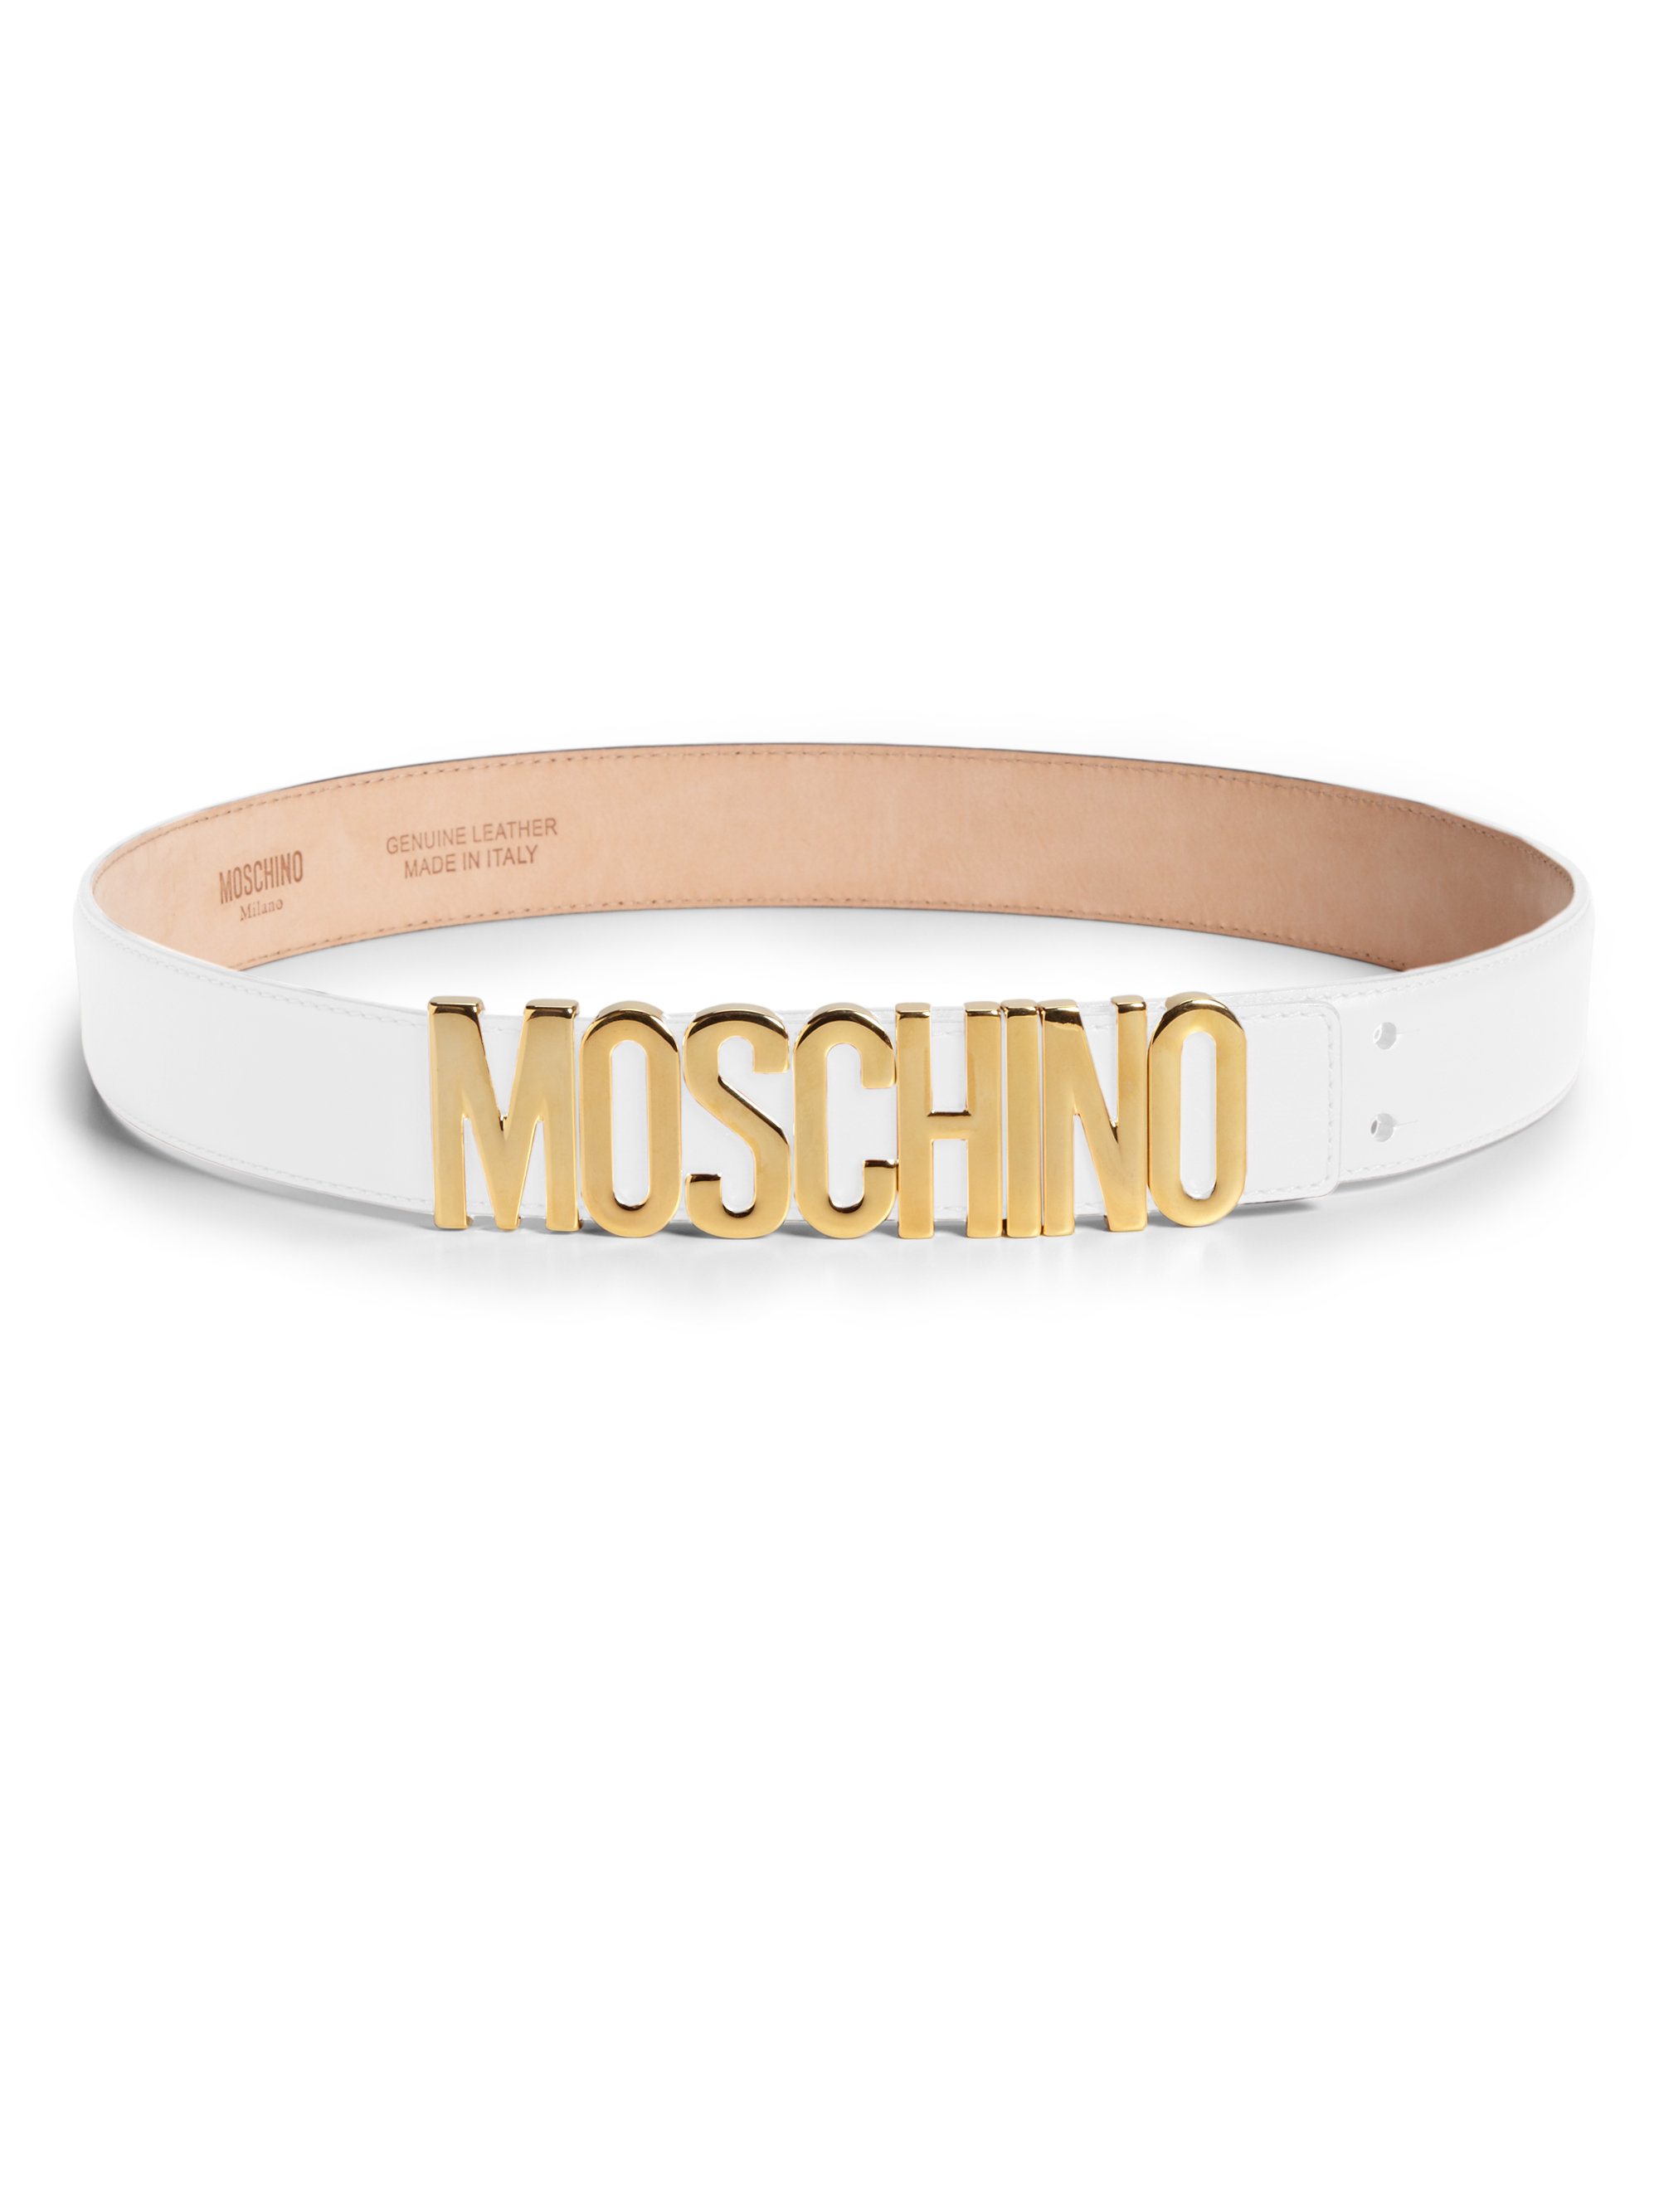 Lyst - Moschino Leather Logo Belt in White